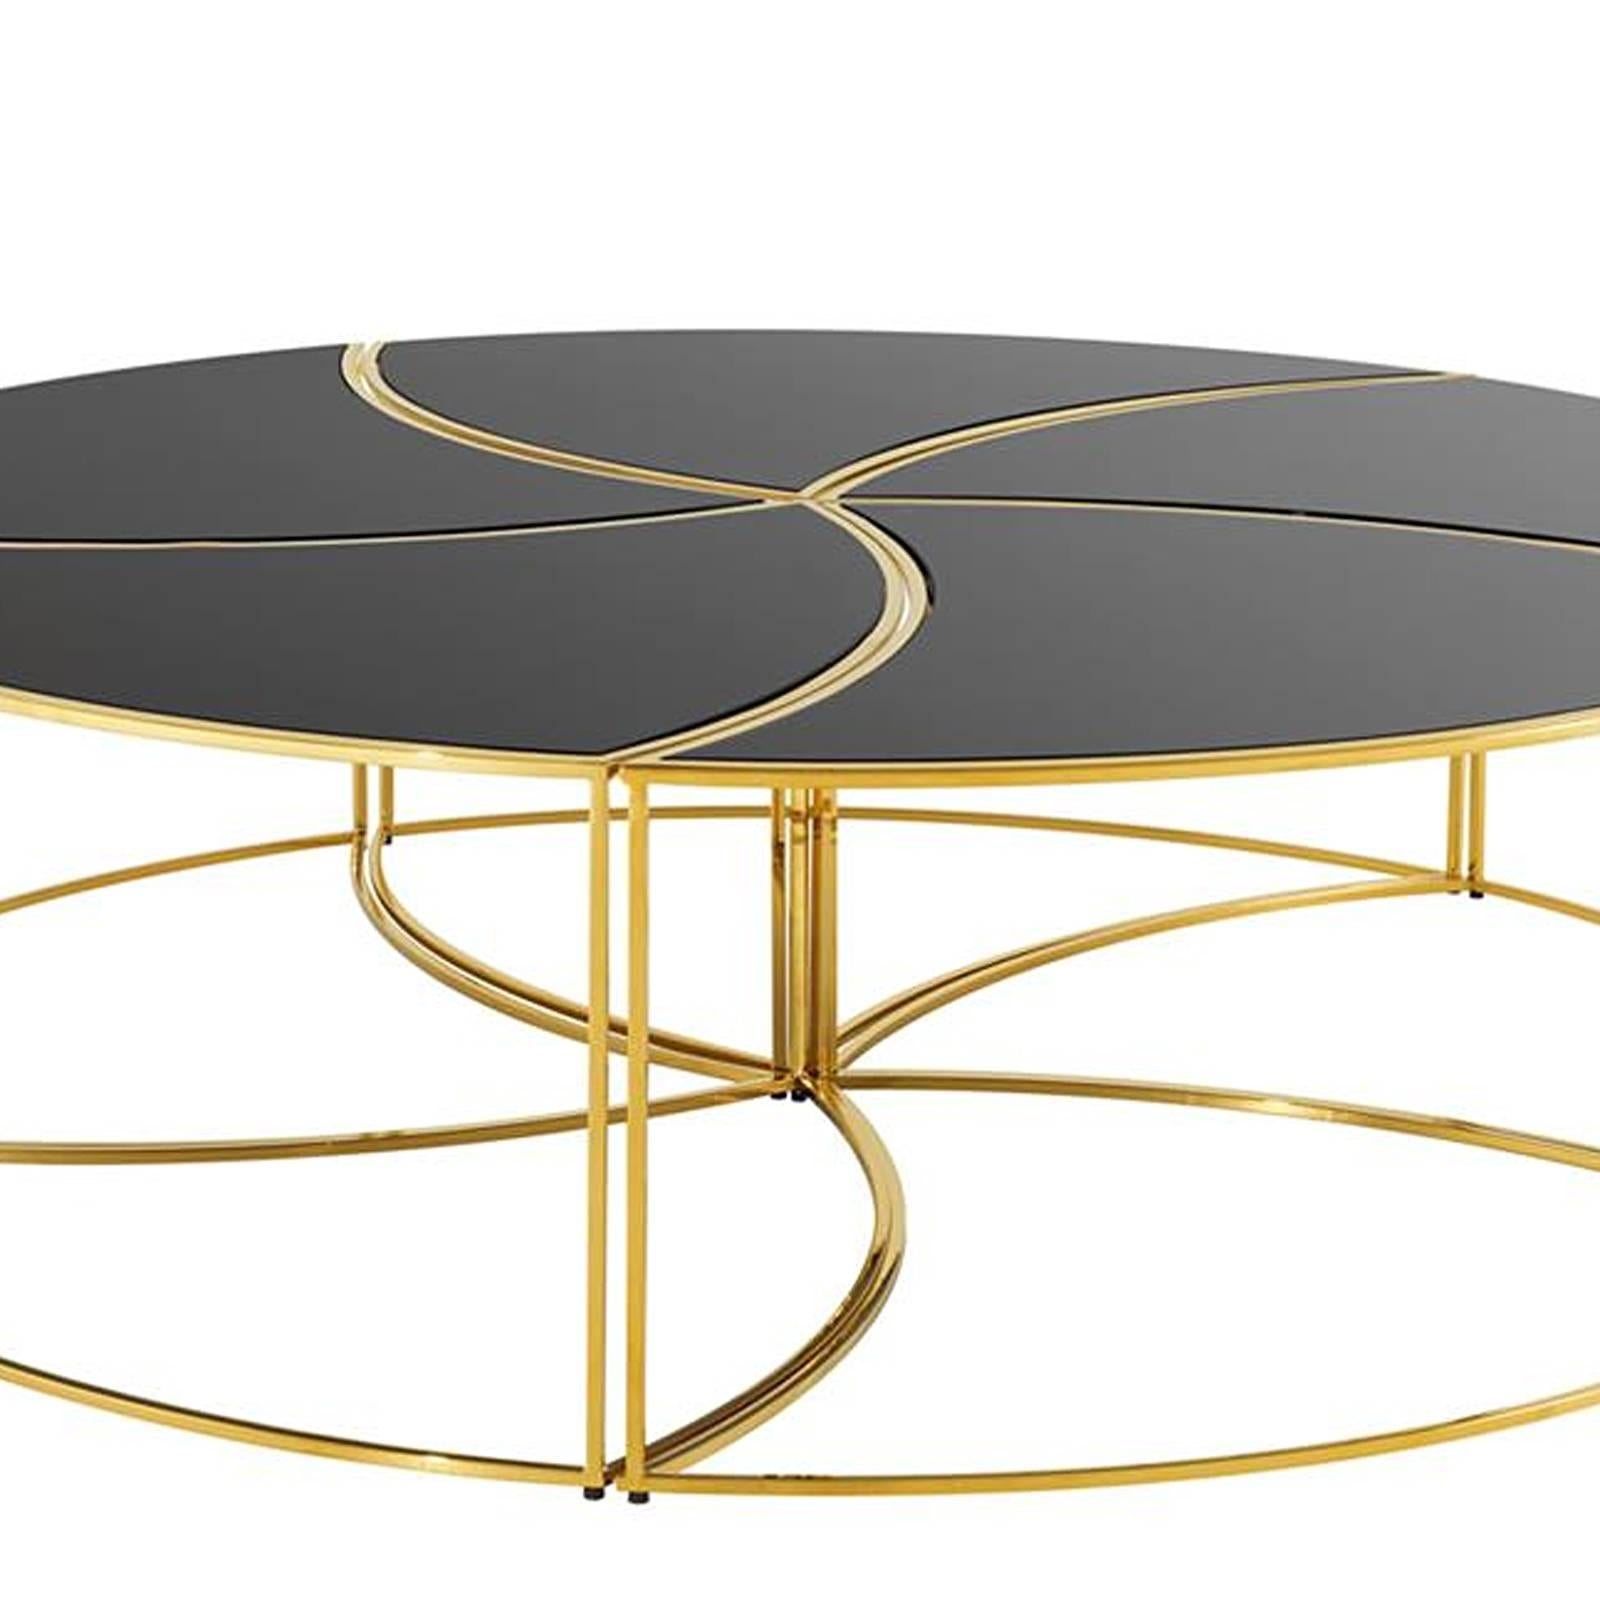 Indian Helix Coffee Table Set of Five in Gold Finish